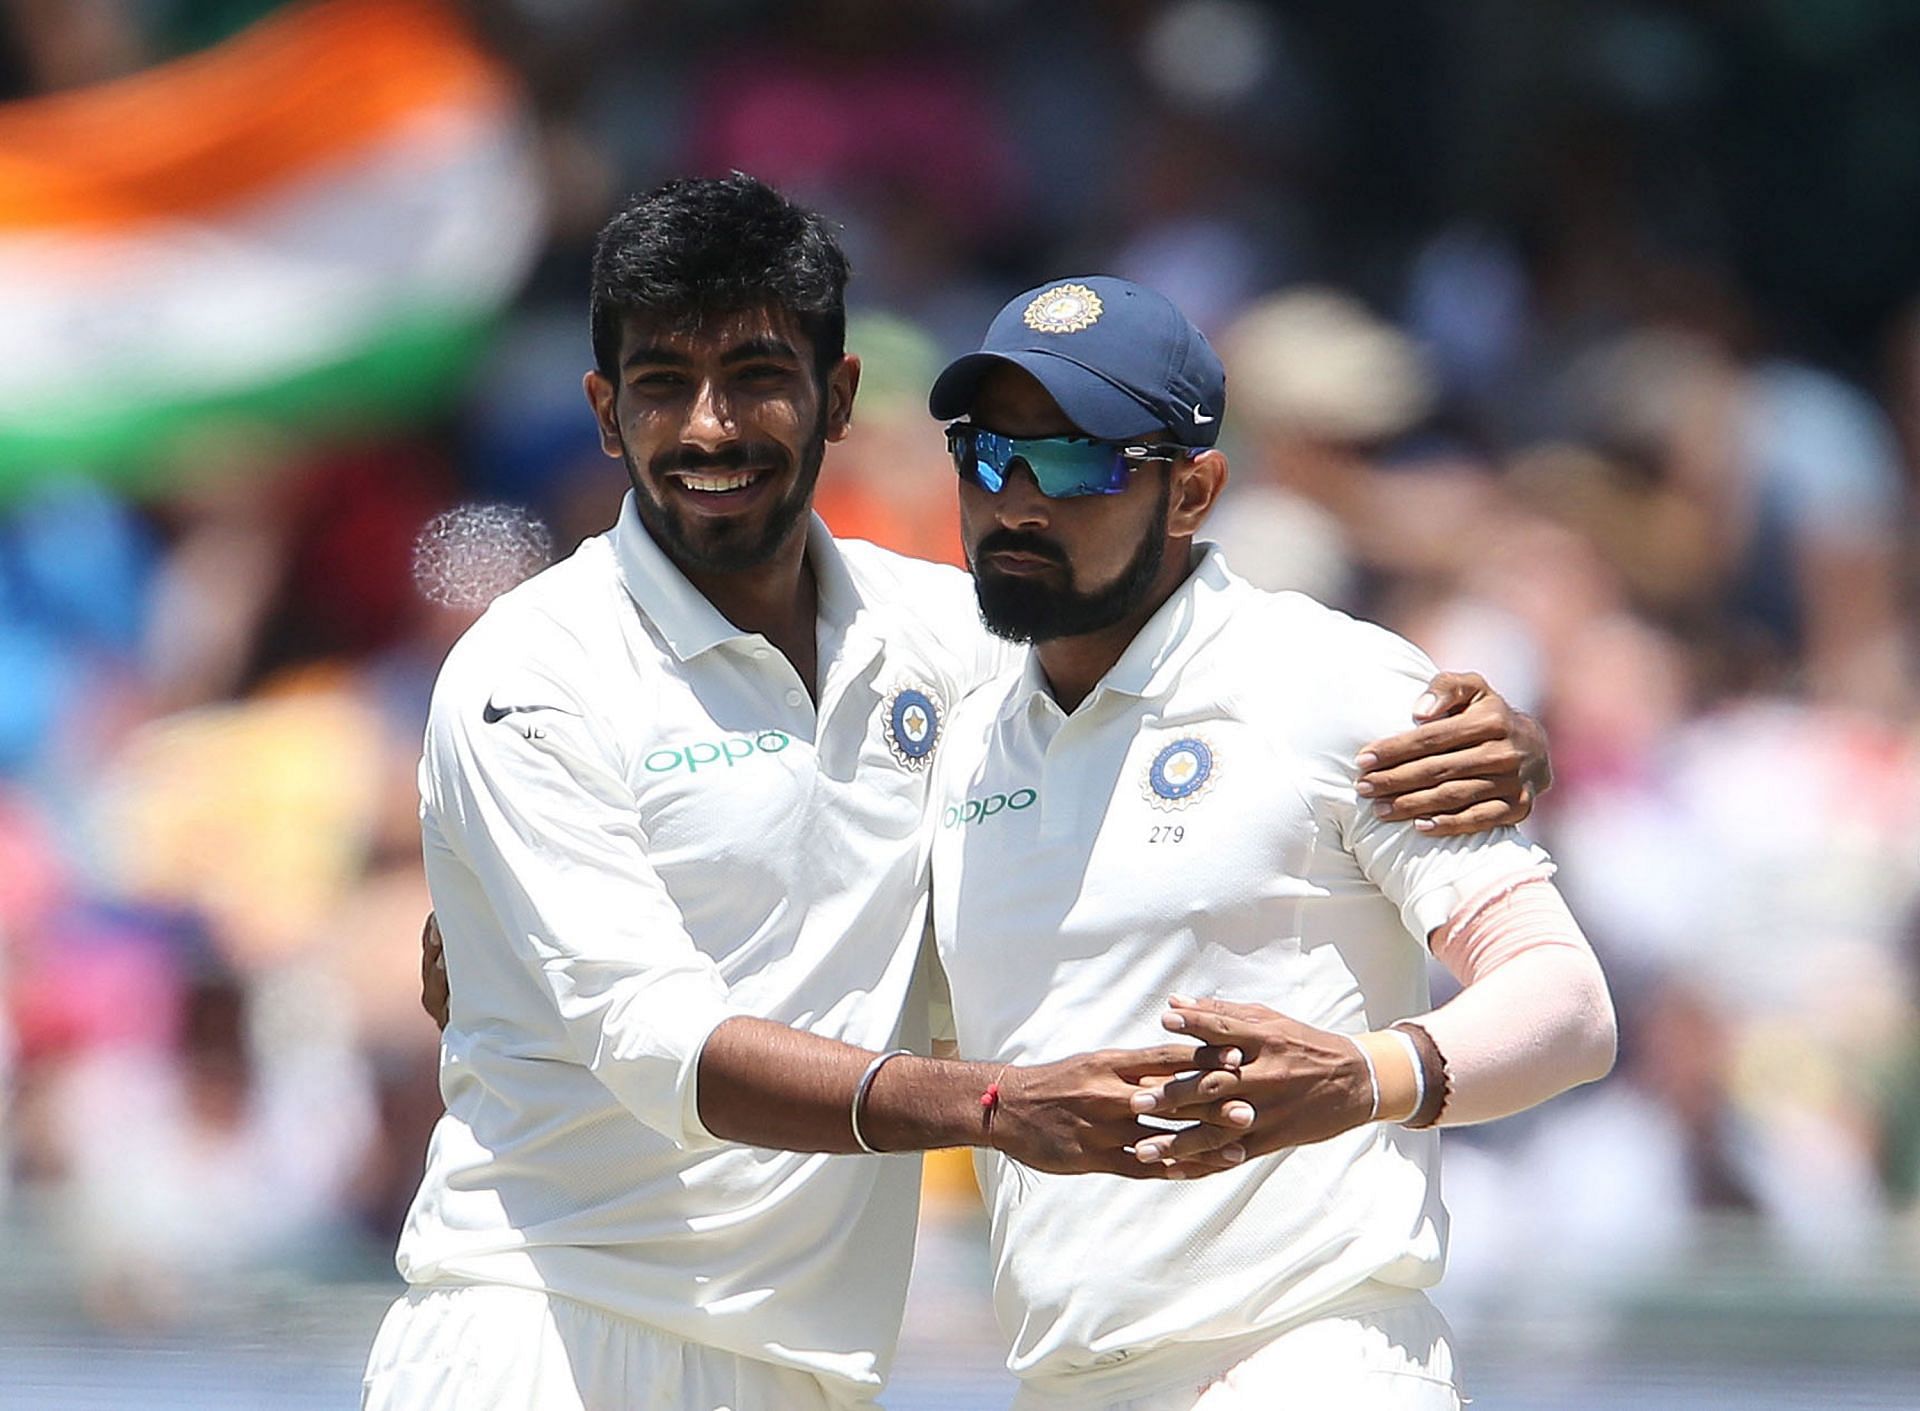 Jasprit Bumrah stepped up on his Test debut